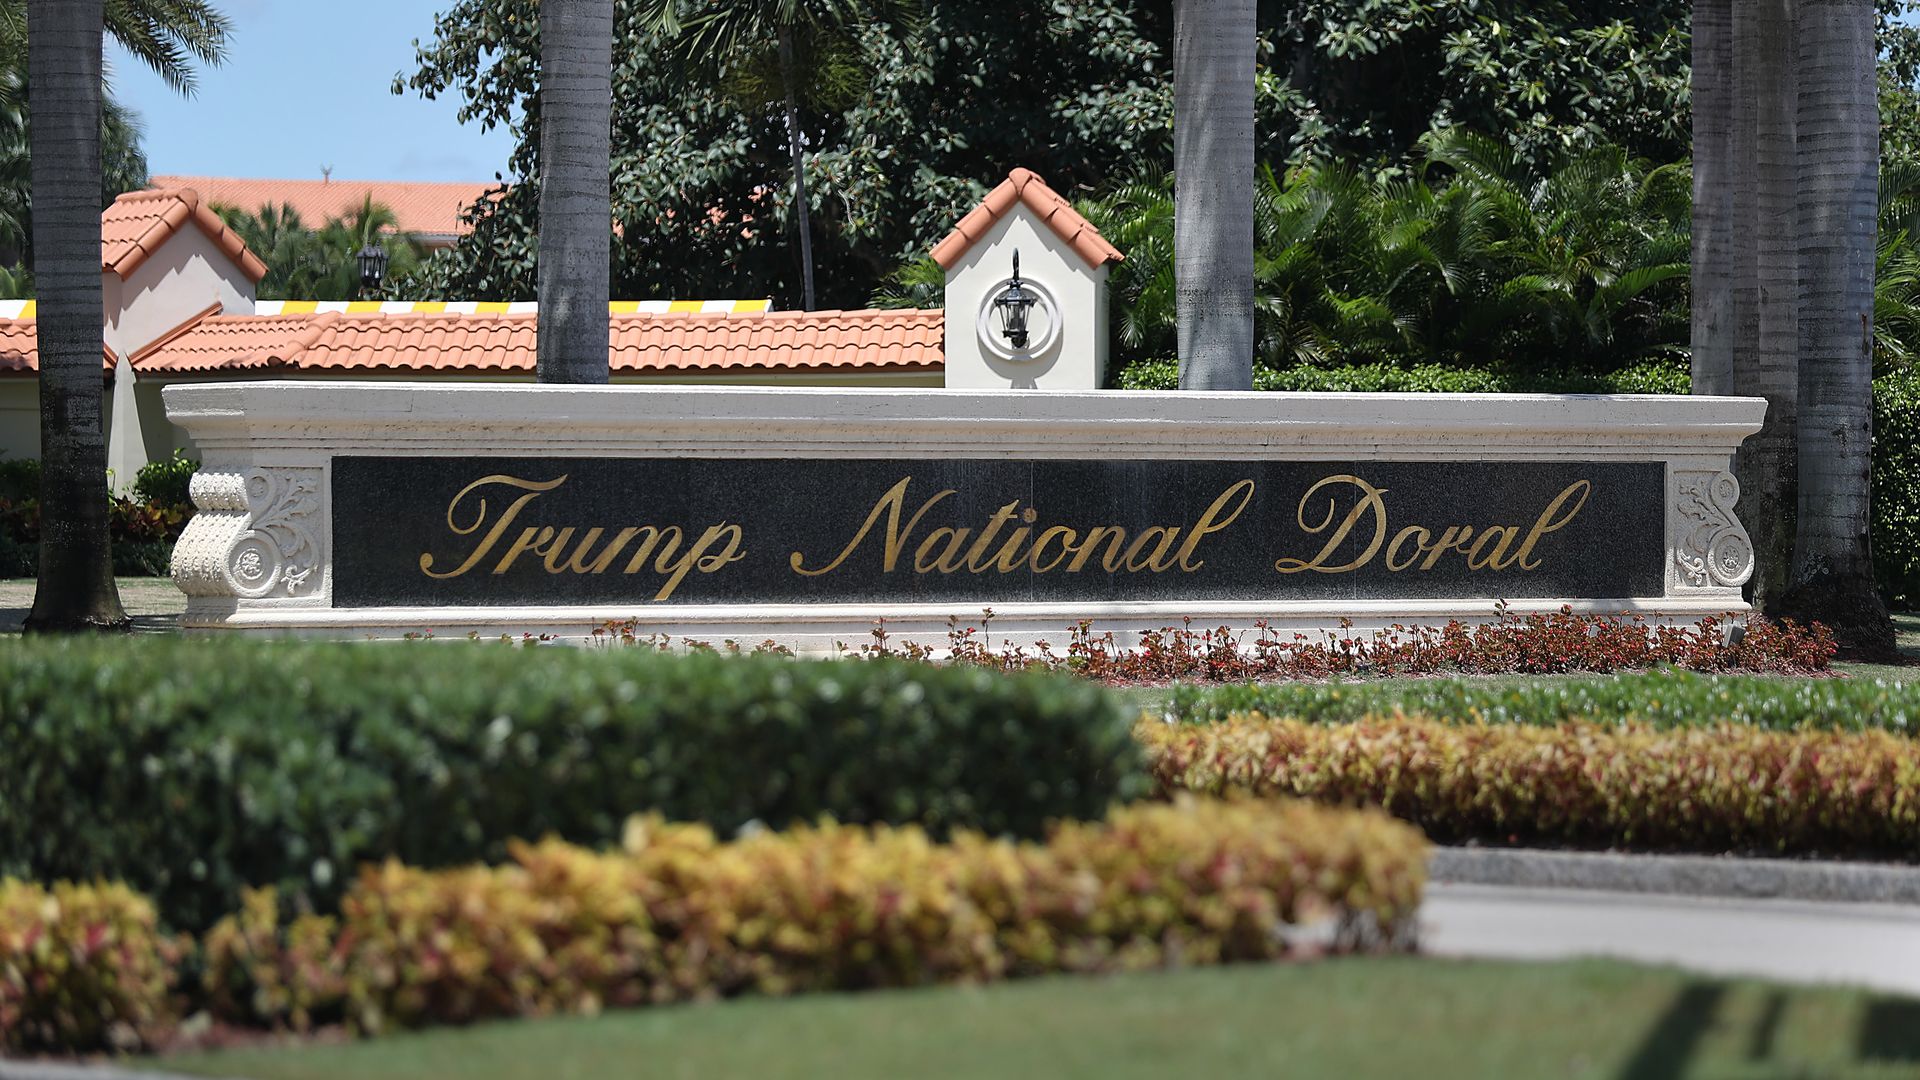 This image shows a large stone sign that says Trump National Doral in a flowing, script font